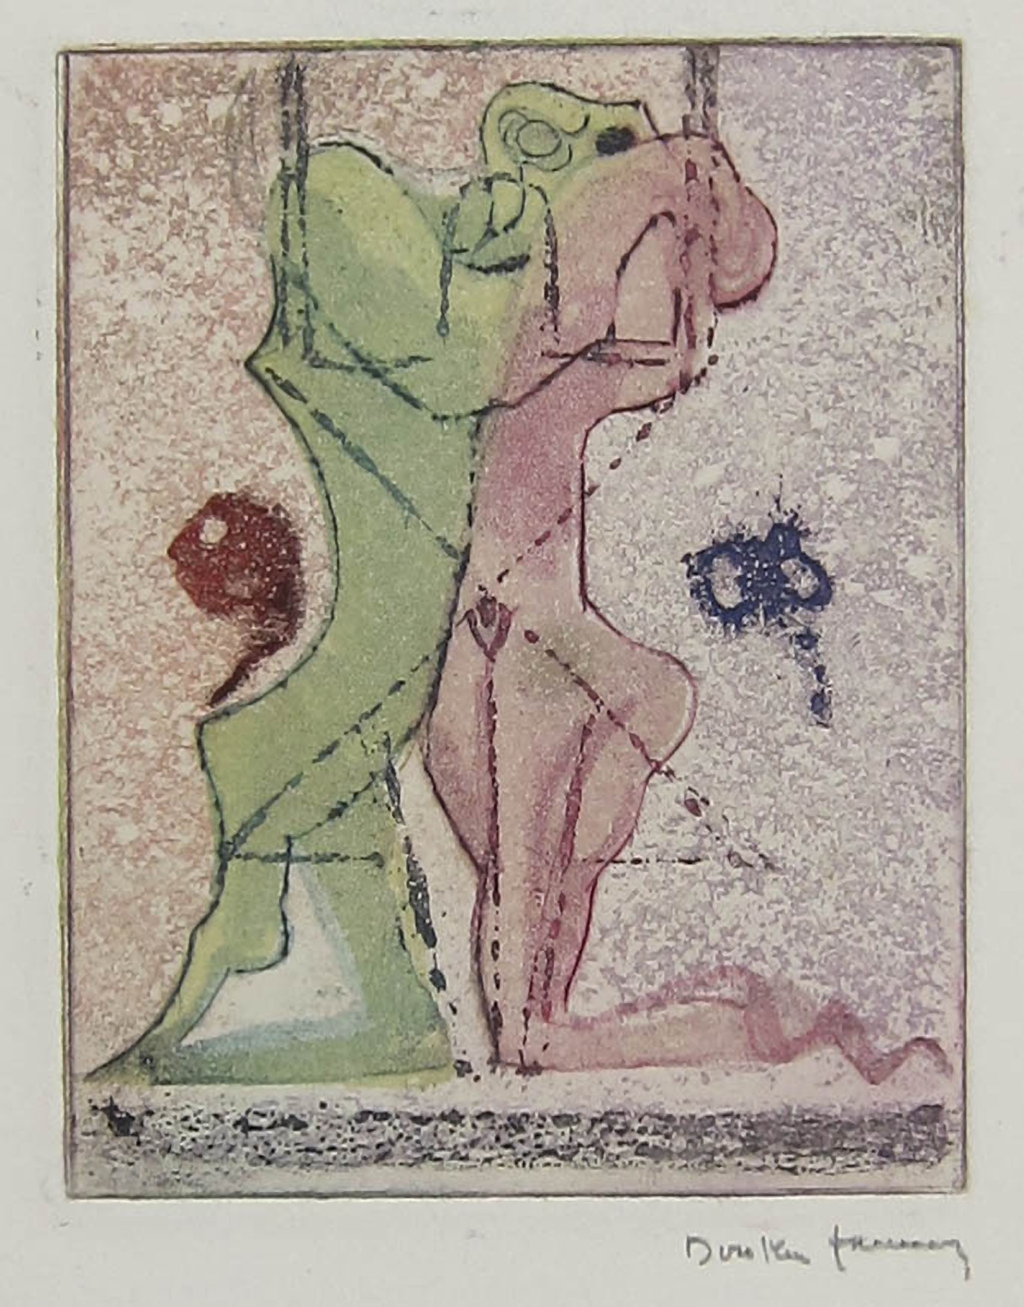 Dorothea Tanning - Untitled - 1973 color etching